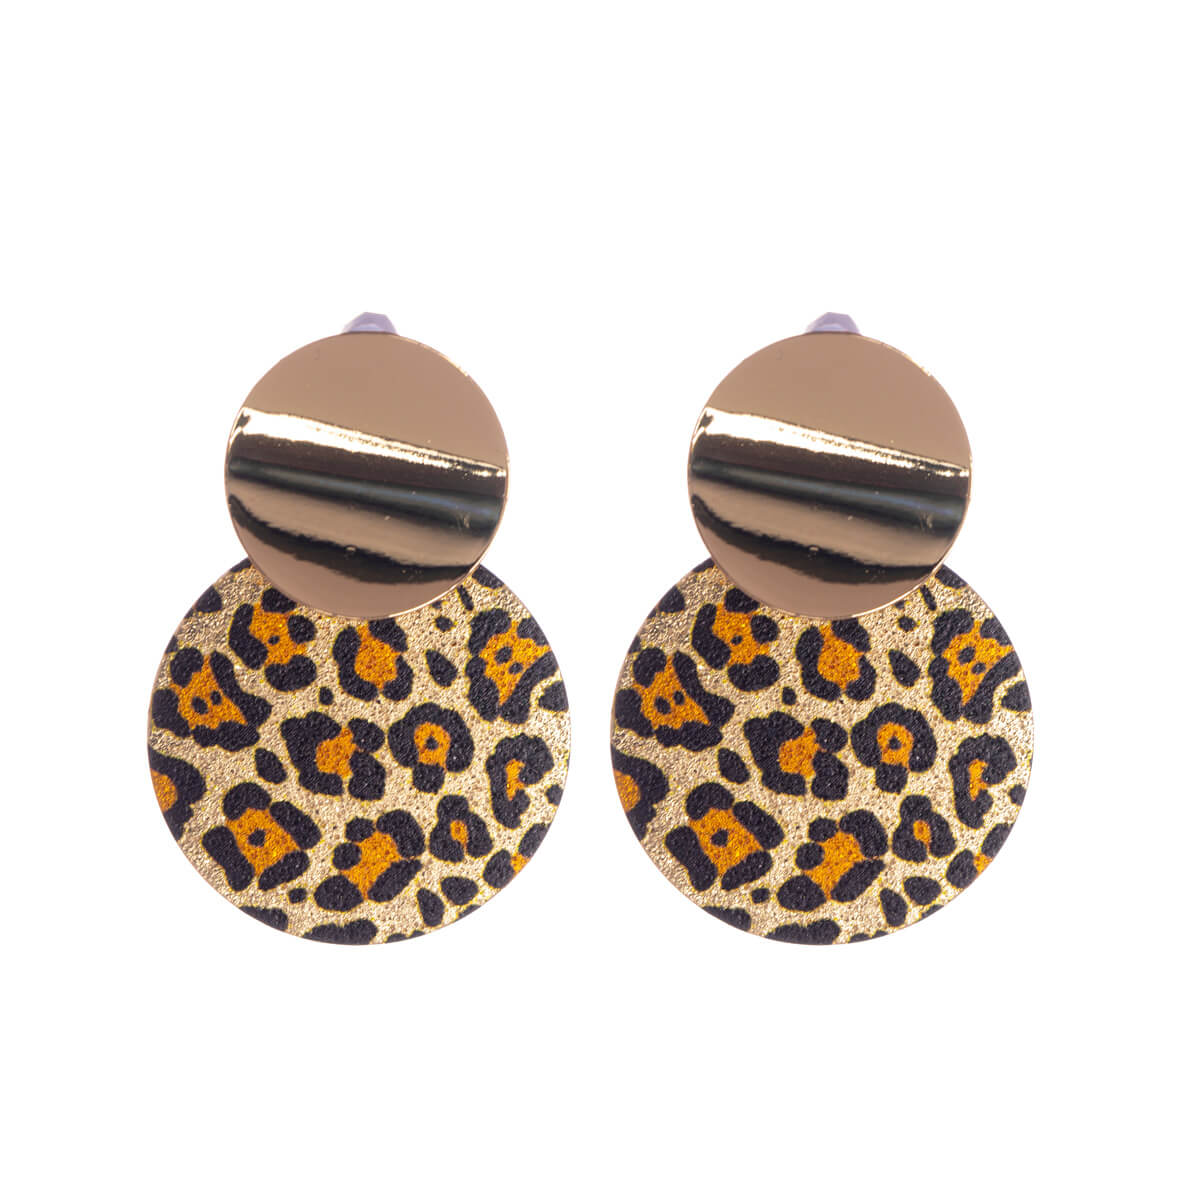 Hanging round leopard earrings